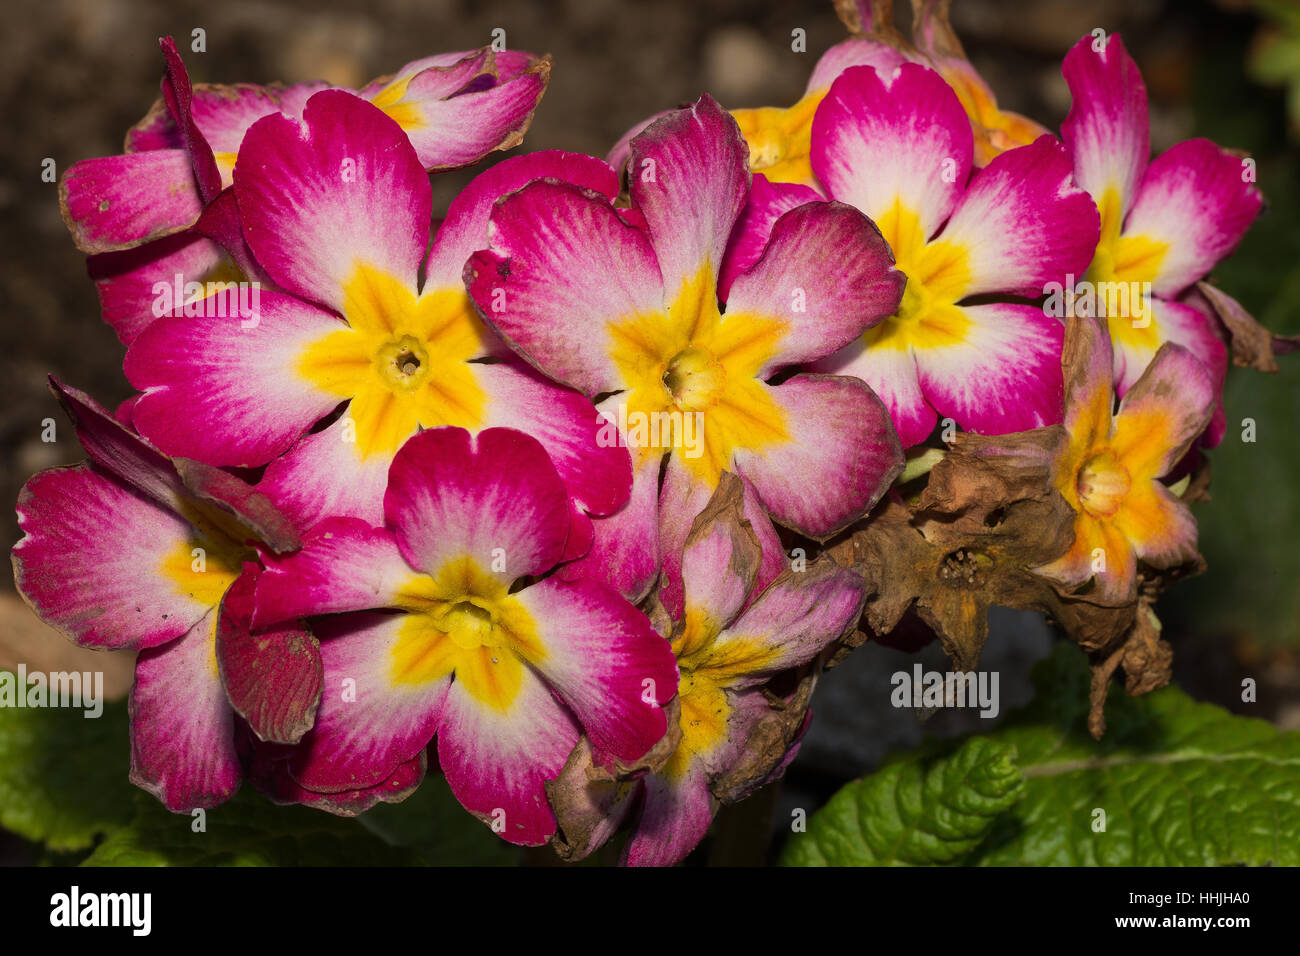 Pink flowers with striped velvet textured petals and yellow centre Stock Photo